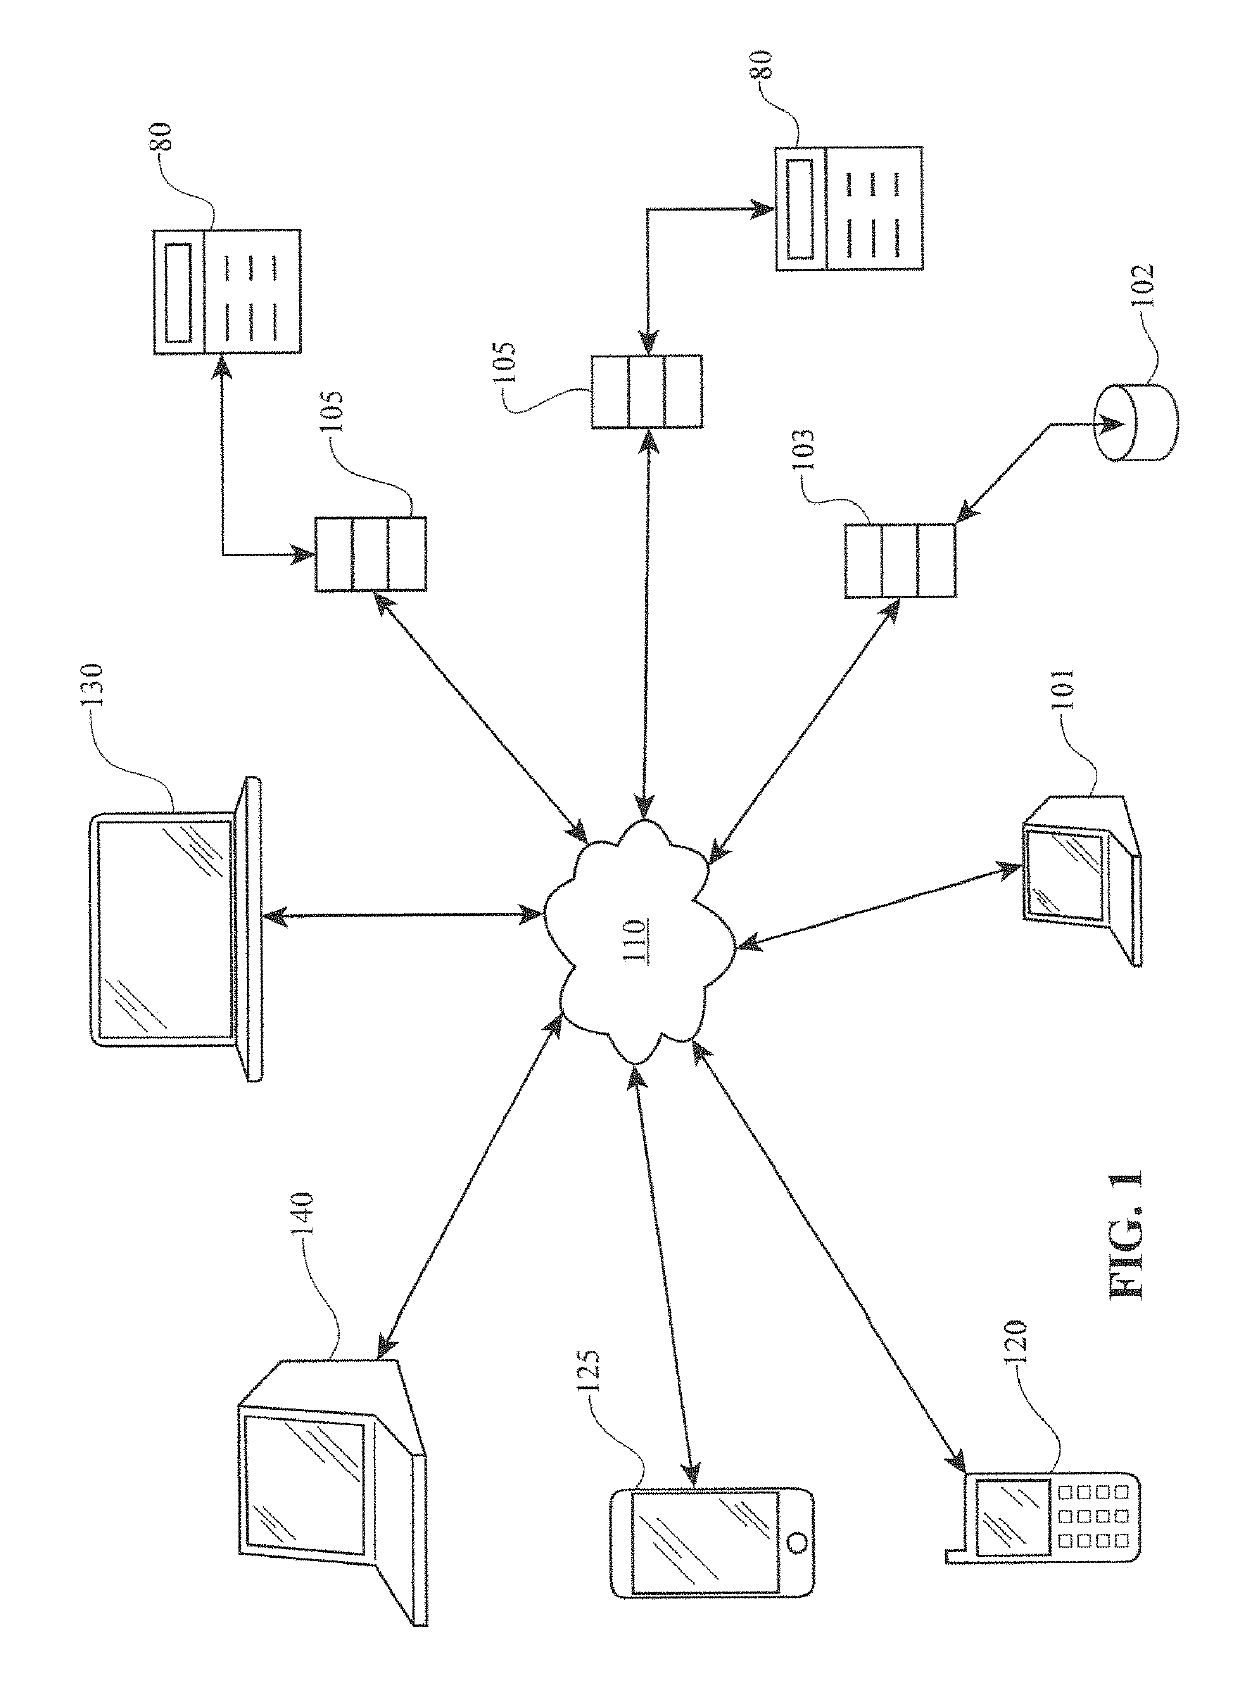 System and method for identifying mutual affinities